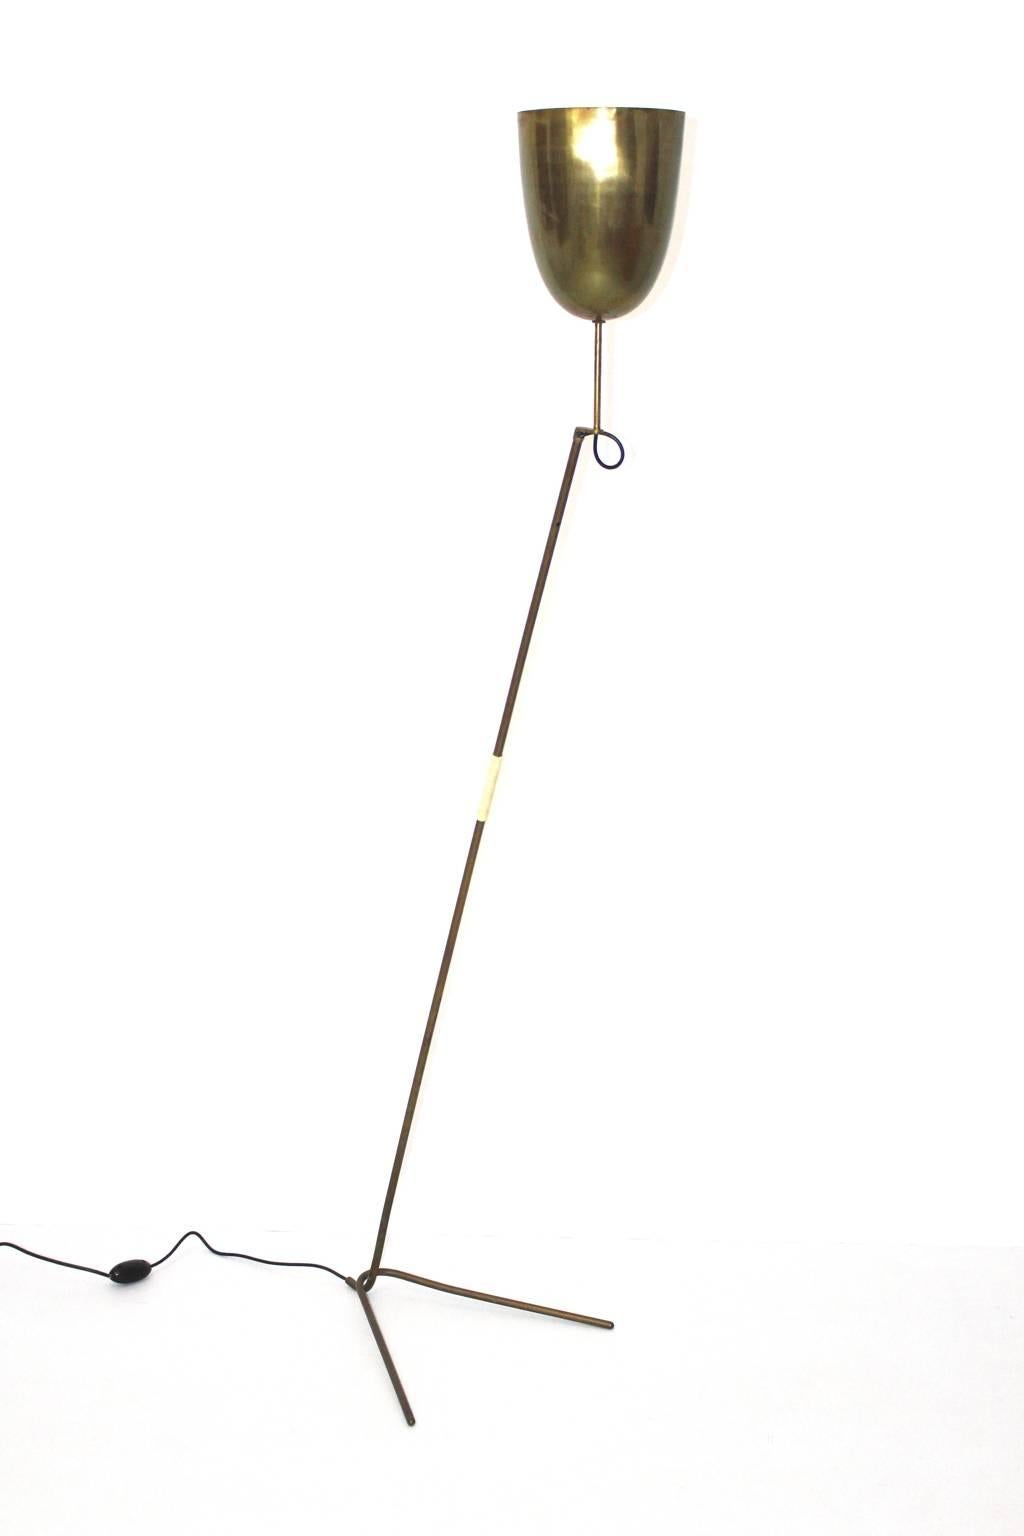 Brass floor lamp with a splayfoot designed and made in 1950s in Austria.
On/off switch. 
One socket Edison 27.

The floor lamp shows in the middle of the stem a decorative plastic string handle.

The floor lamp is in very good condition with nice